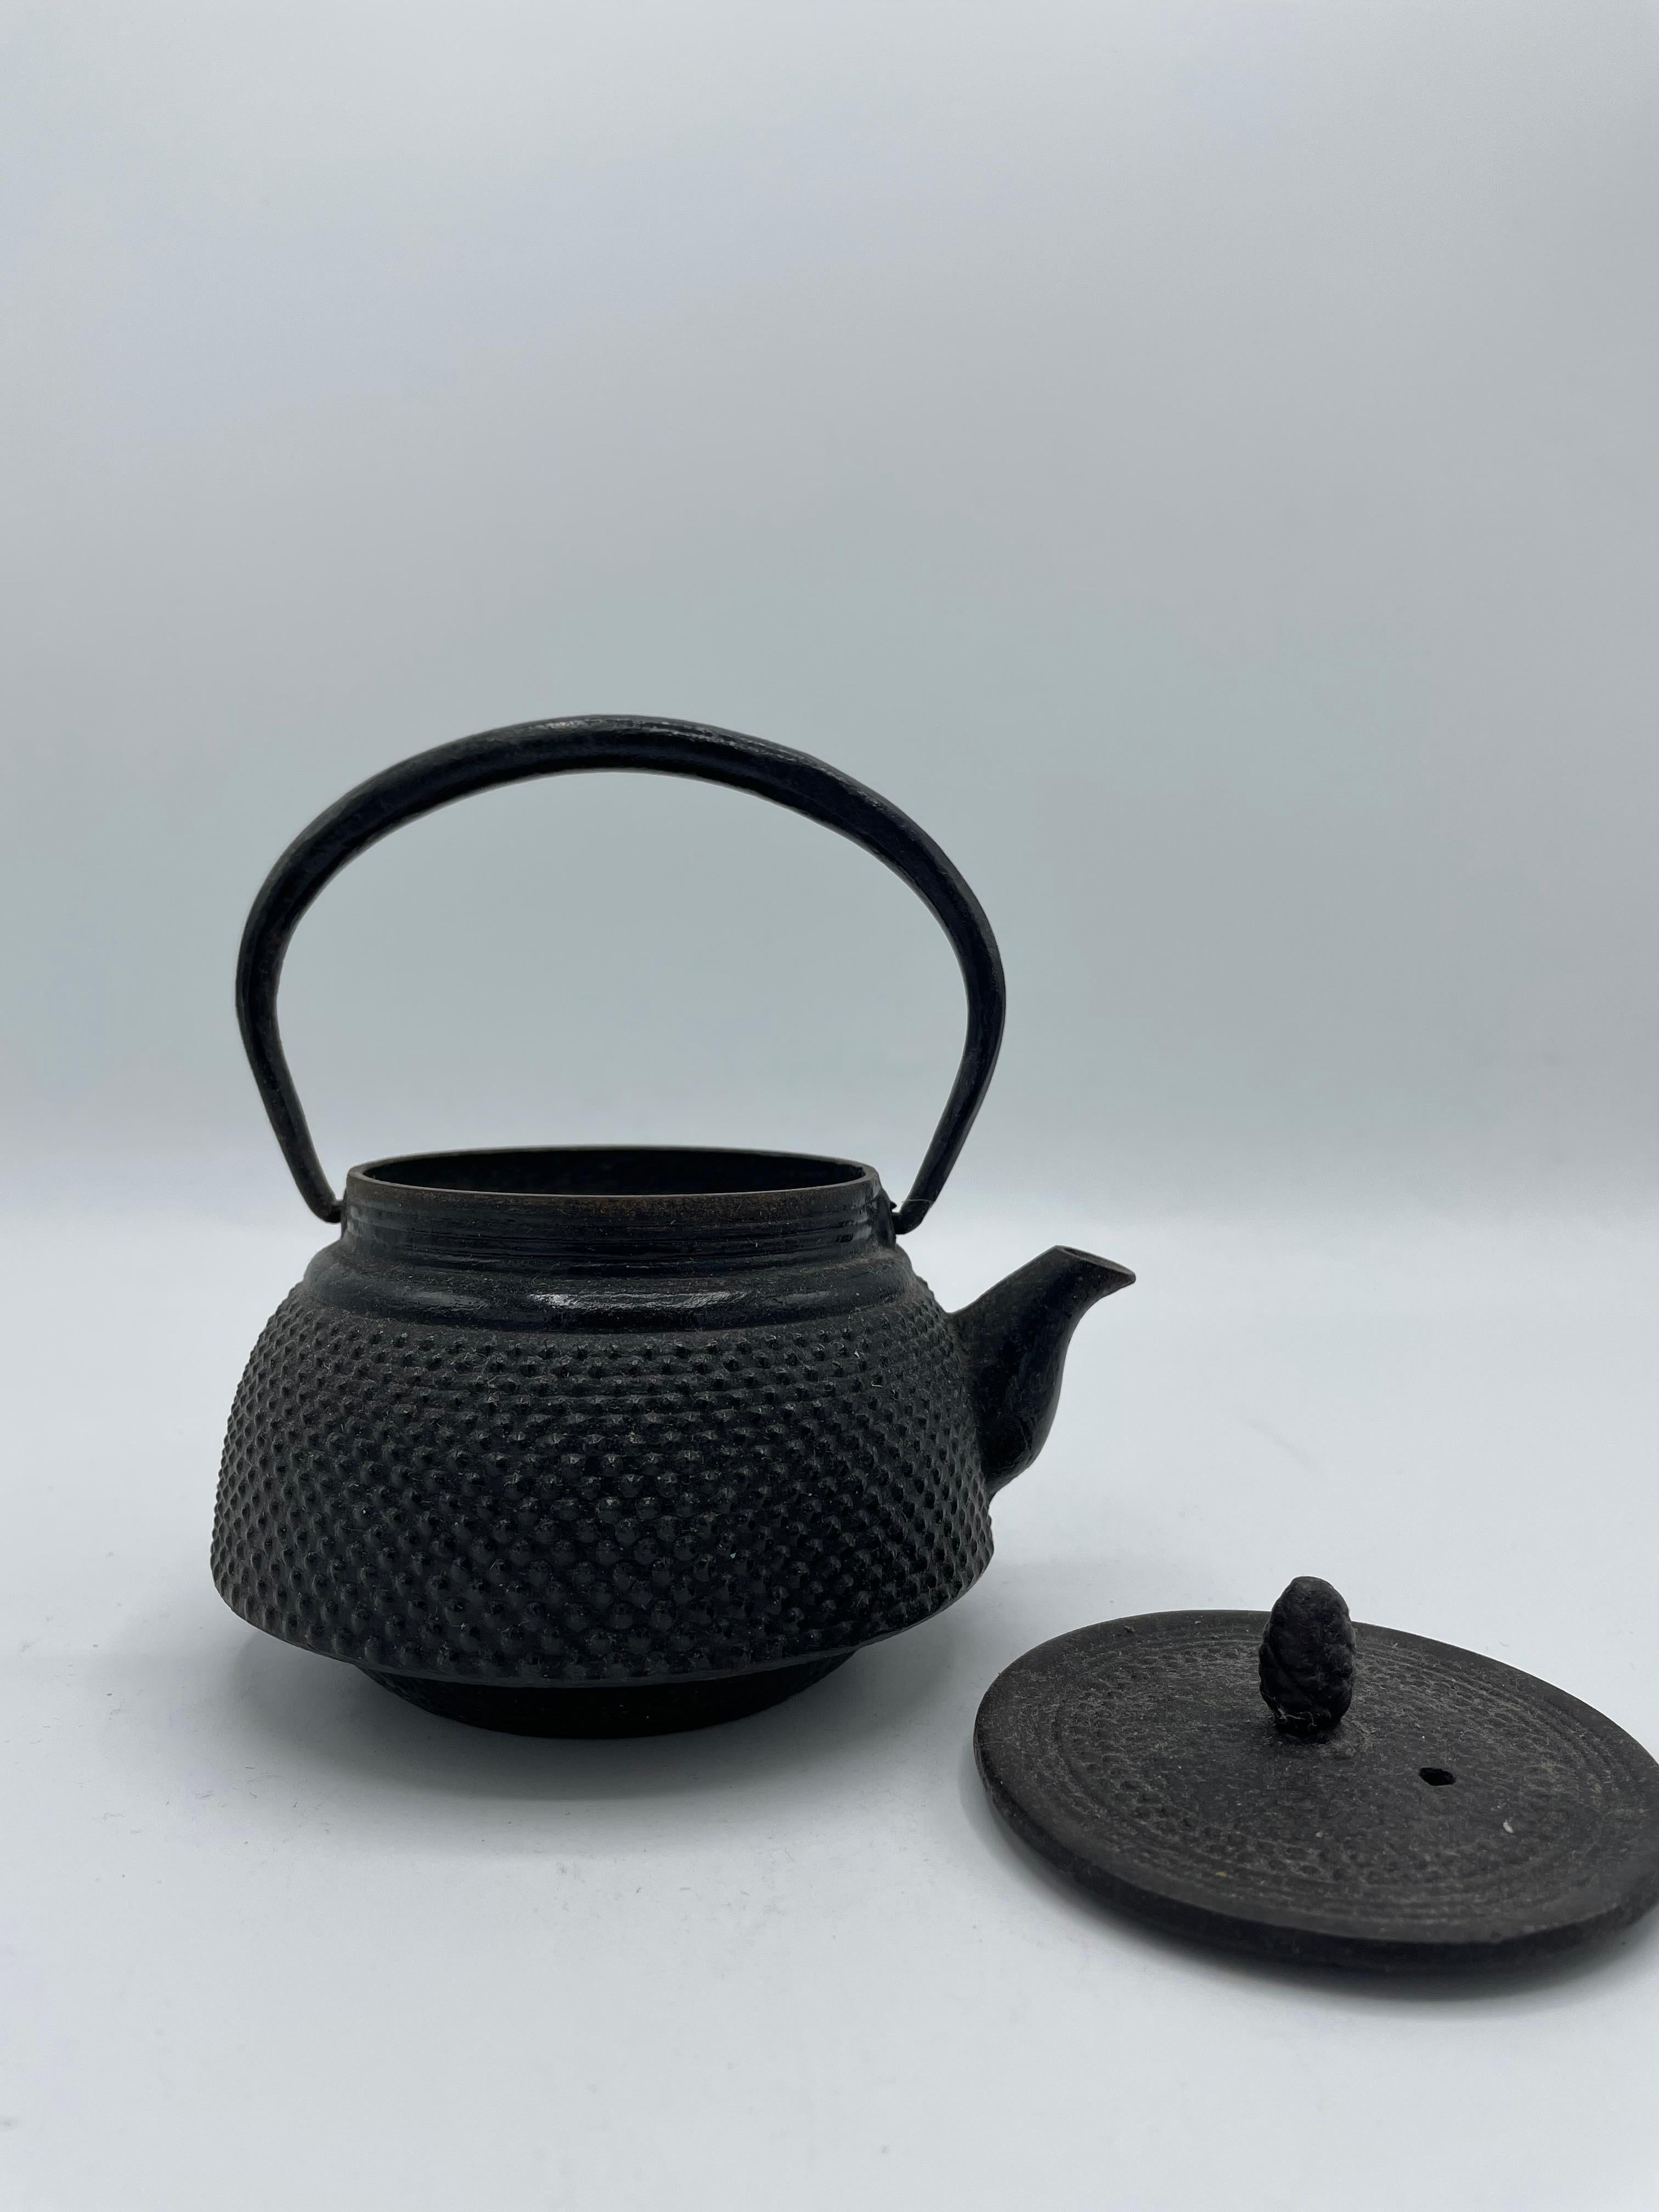 This kettle was made in 1980s, in Showa era. 
The cast iron kettles like this item are called 'Tetsubin' in Japan.
It can be put on the fire or an induction plate. Also we can use it as decoration.
Do not scratch the bottom of the kettle to leave